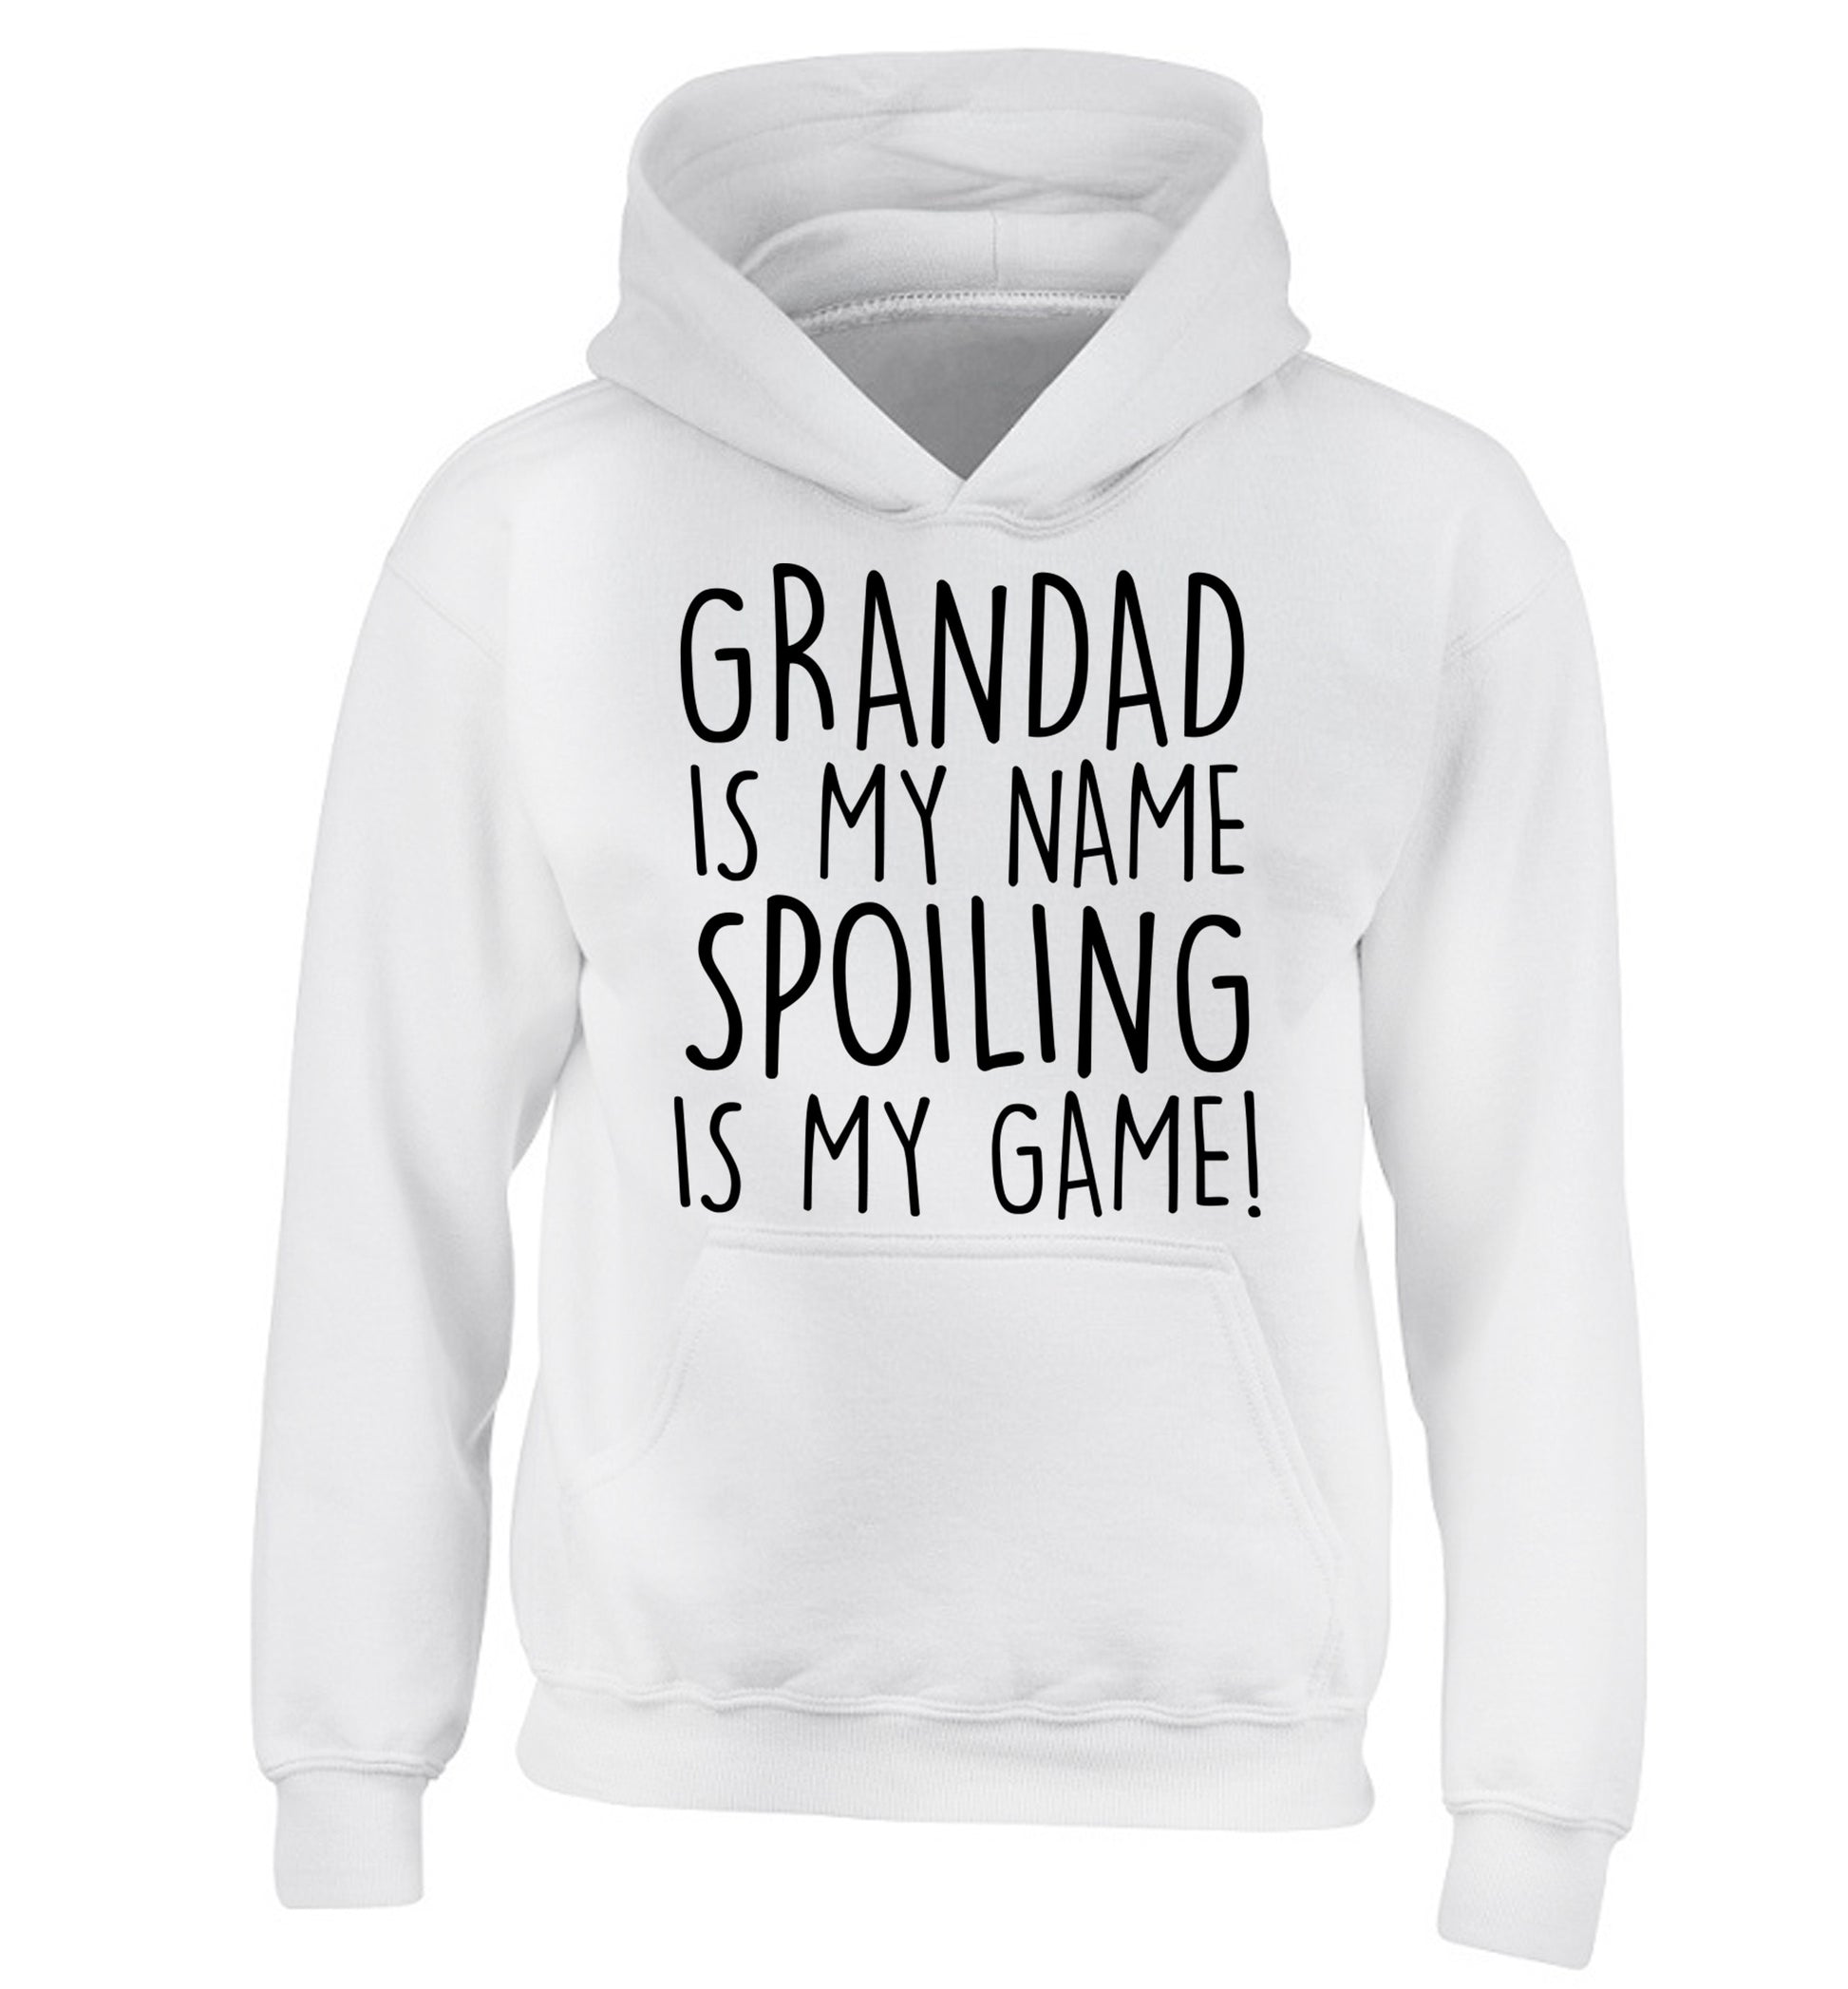 Grandad is my name, spoiling is my game children's white hoodie 12-14 Years